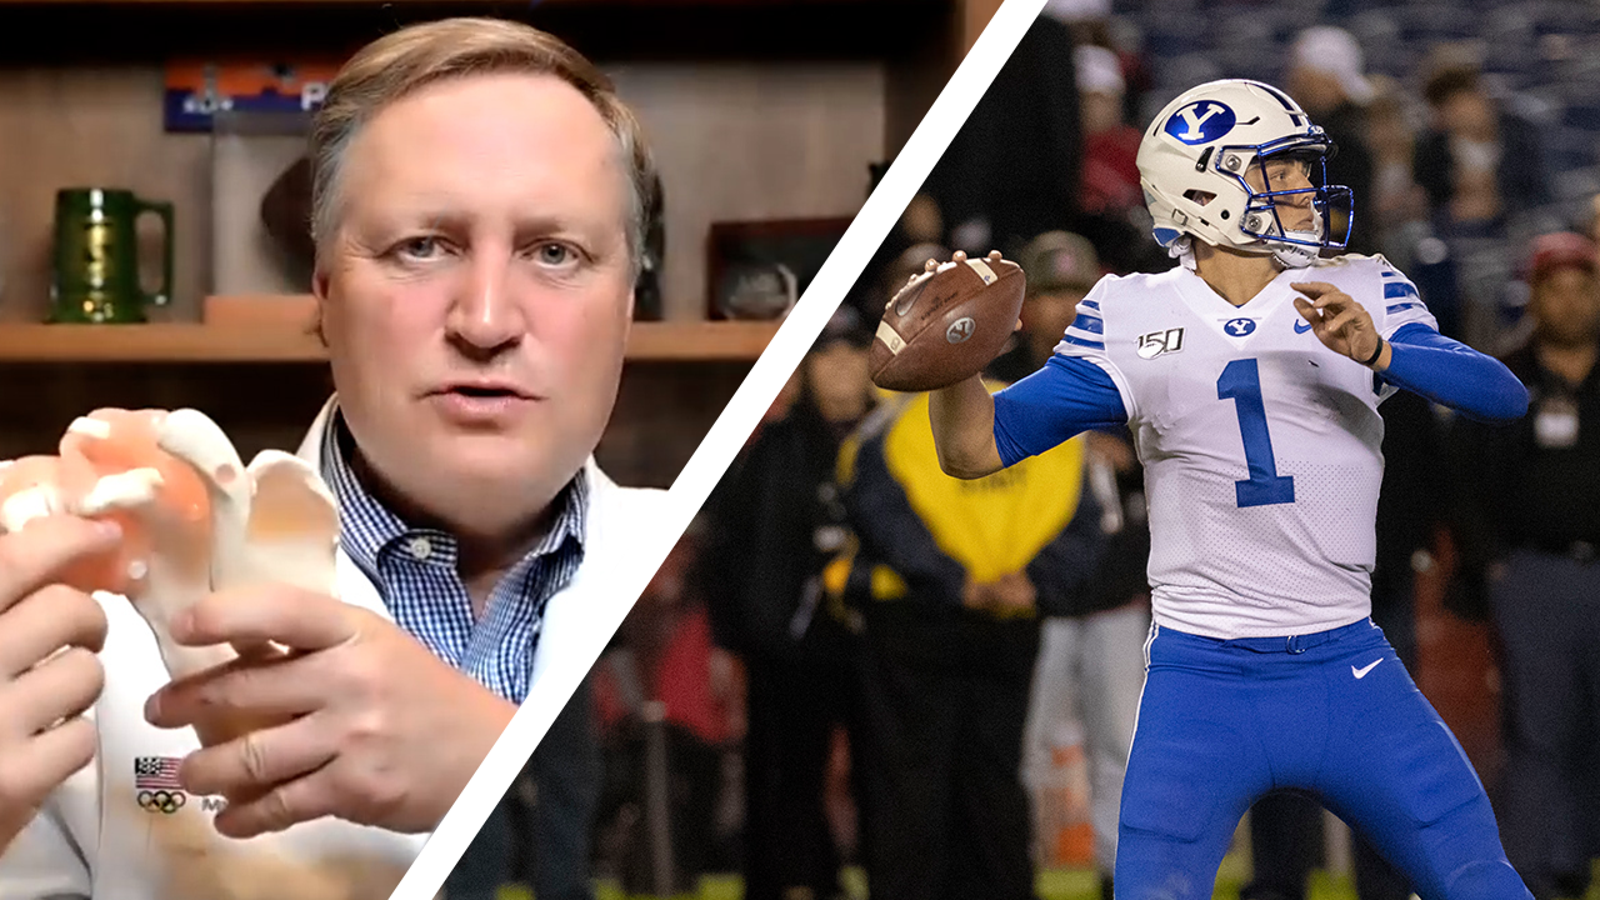 Zach Wilson - NFL draft Injury Review - Dr. Provencher breaks down the star QB’s past shoulder injury